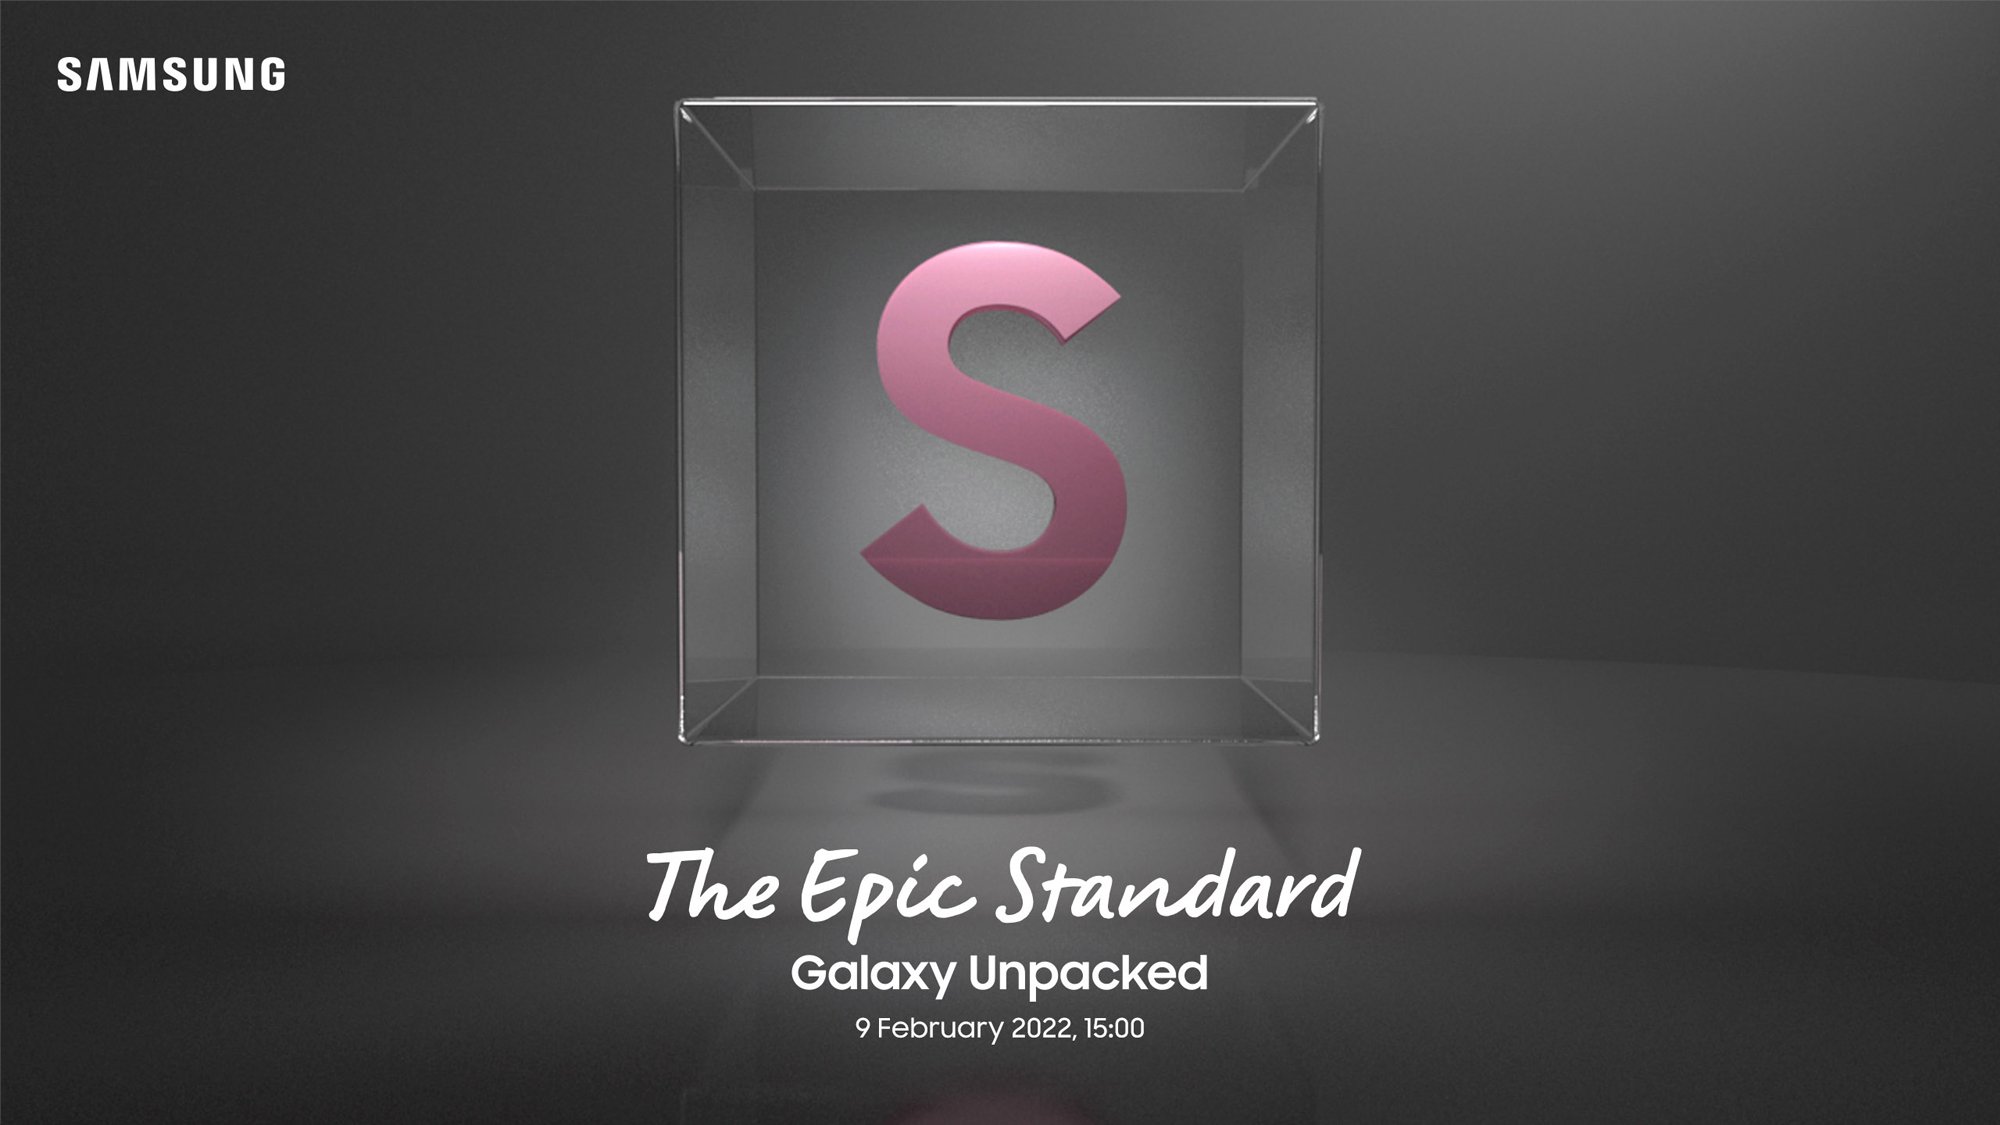 Samsung Galaxy Unpacked 'The Epic Standard' promotional material leaks